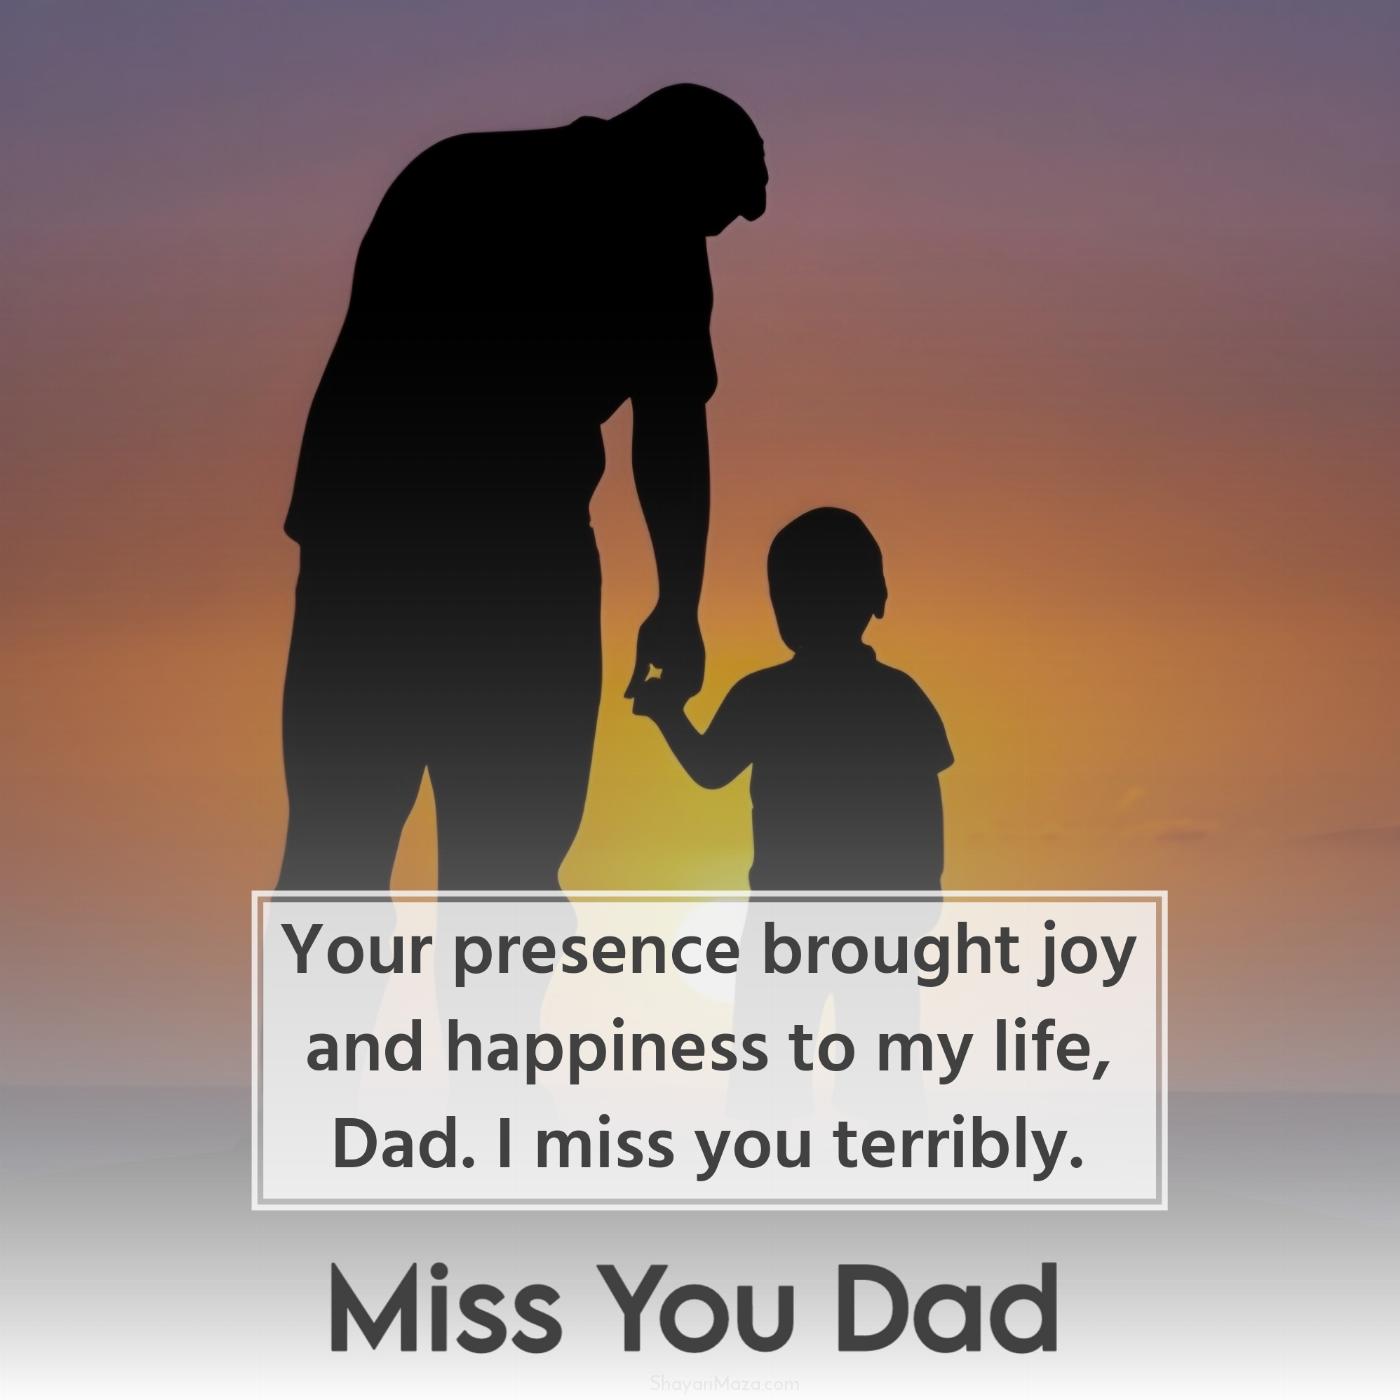 Your presence brought joy and happiness to my life Dad